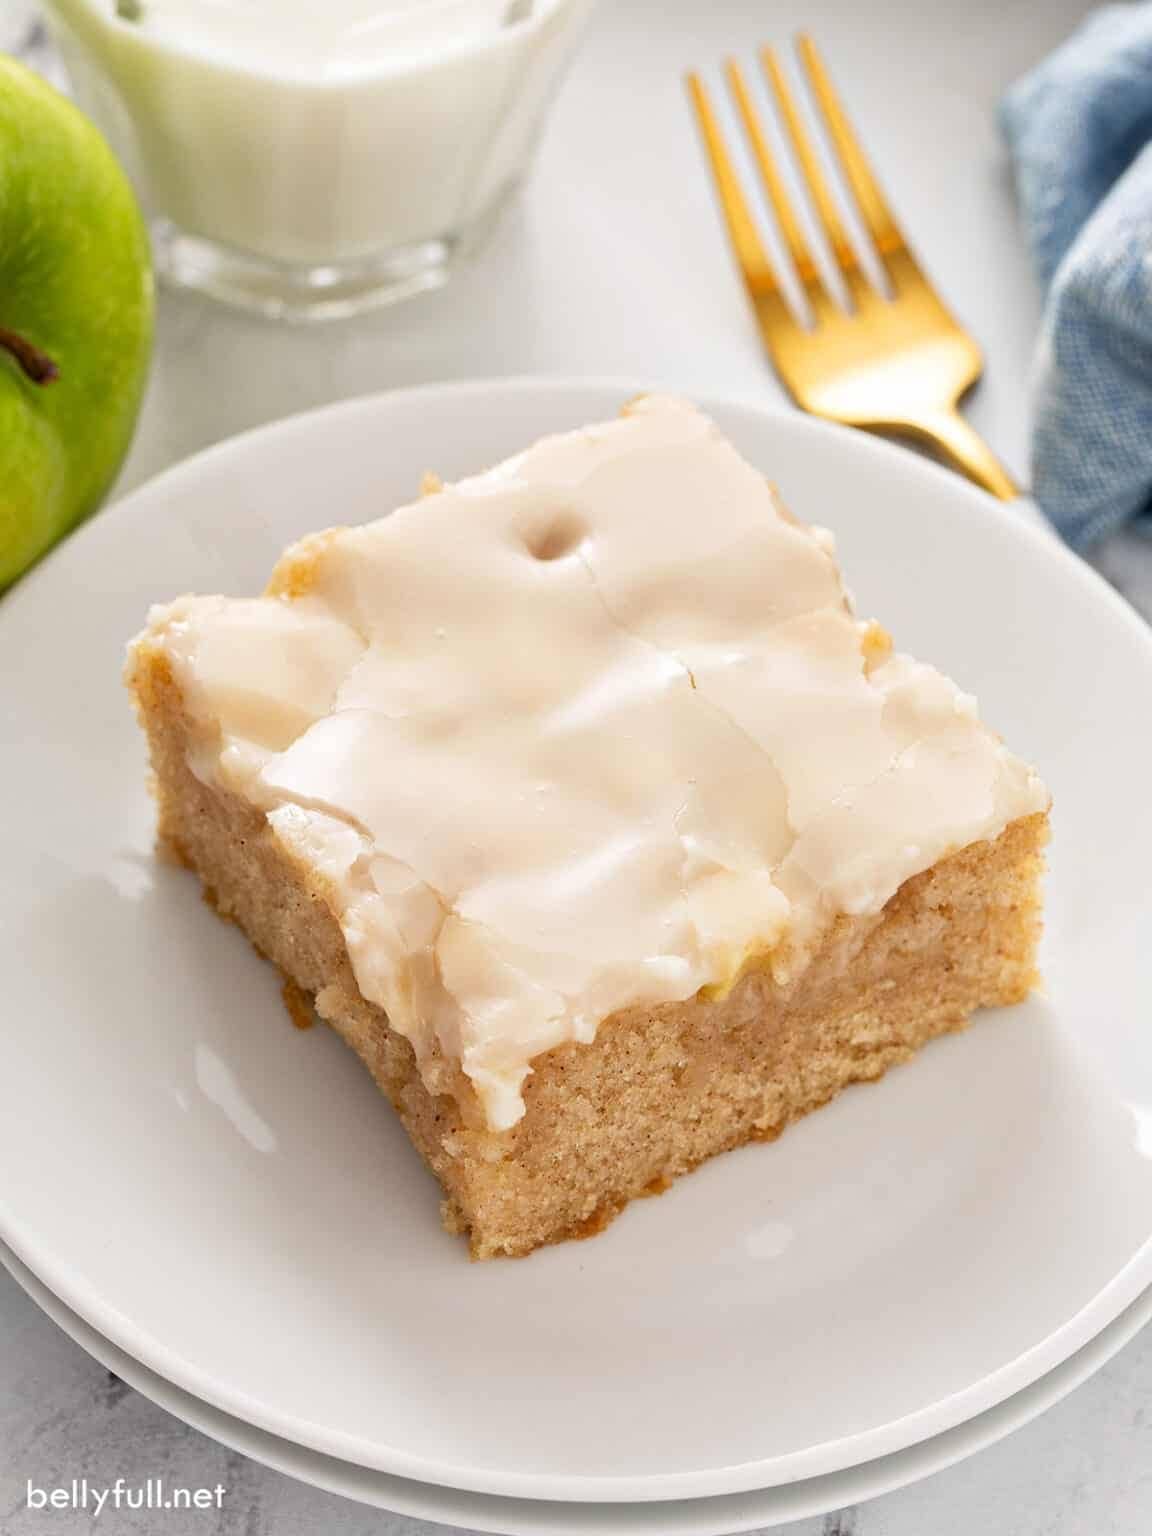 A piece of slice of apple sheet cake with sugar glaze served on a white dessert plate.